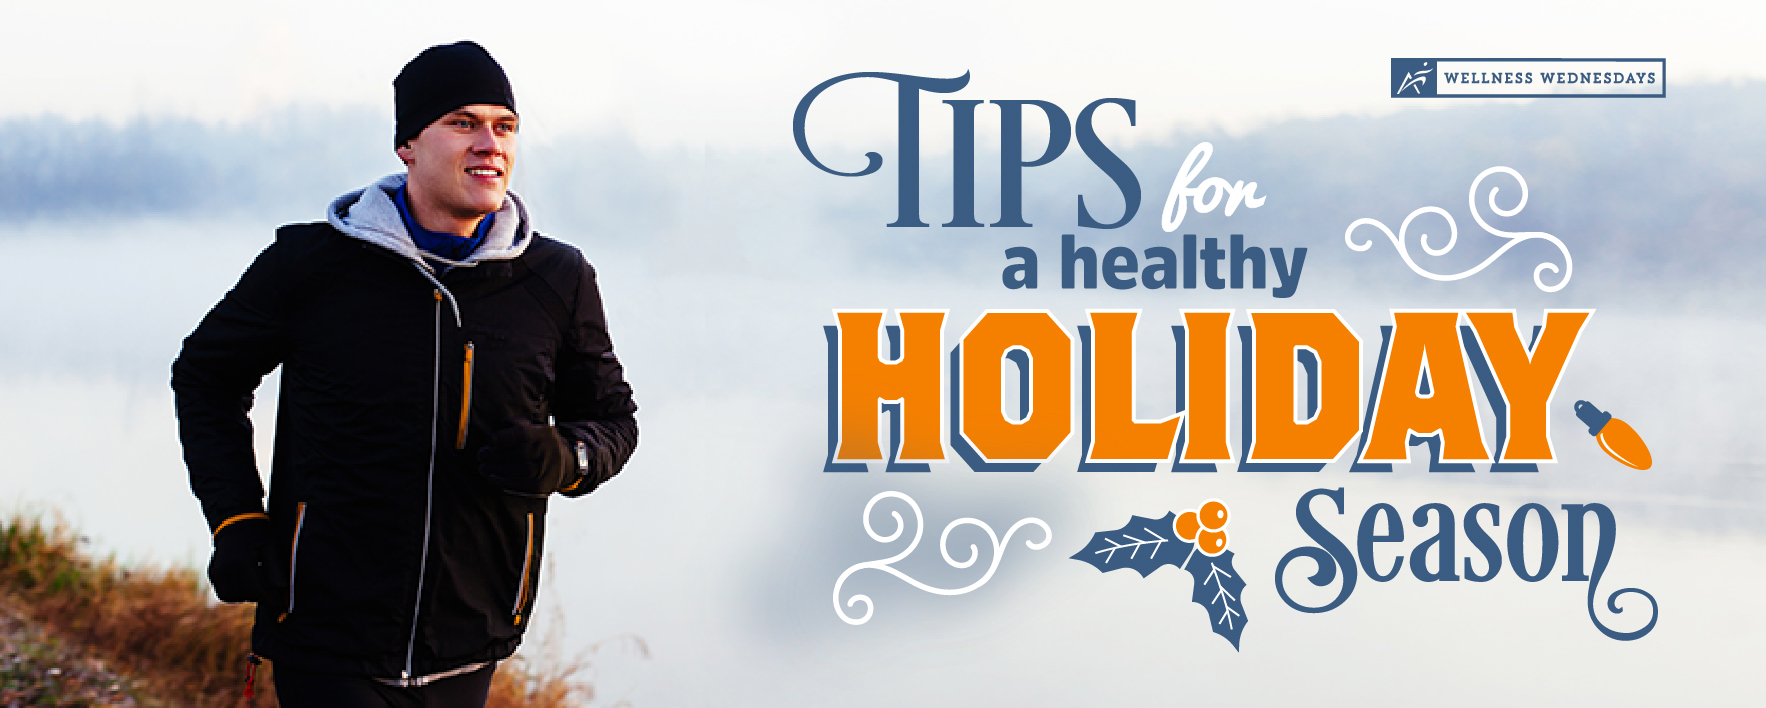 Tips for a healthy holiday season with man running